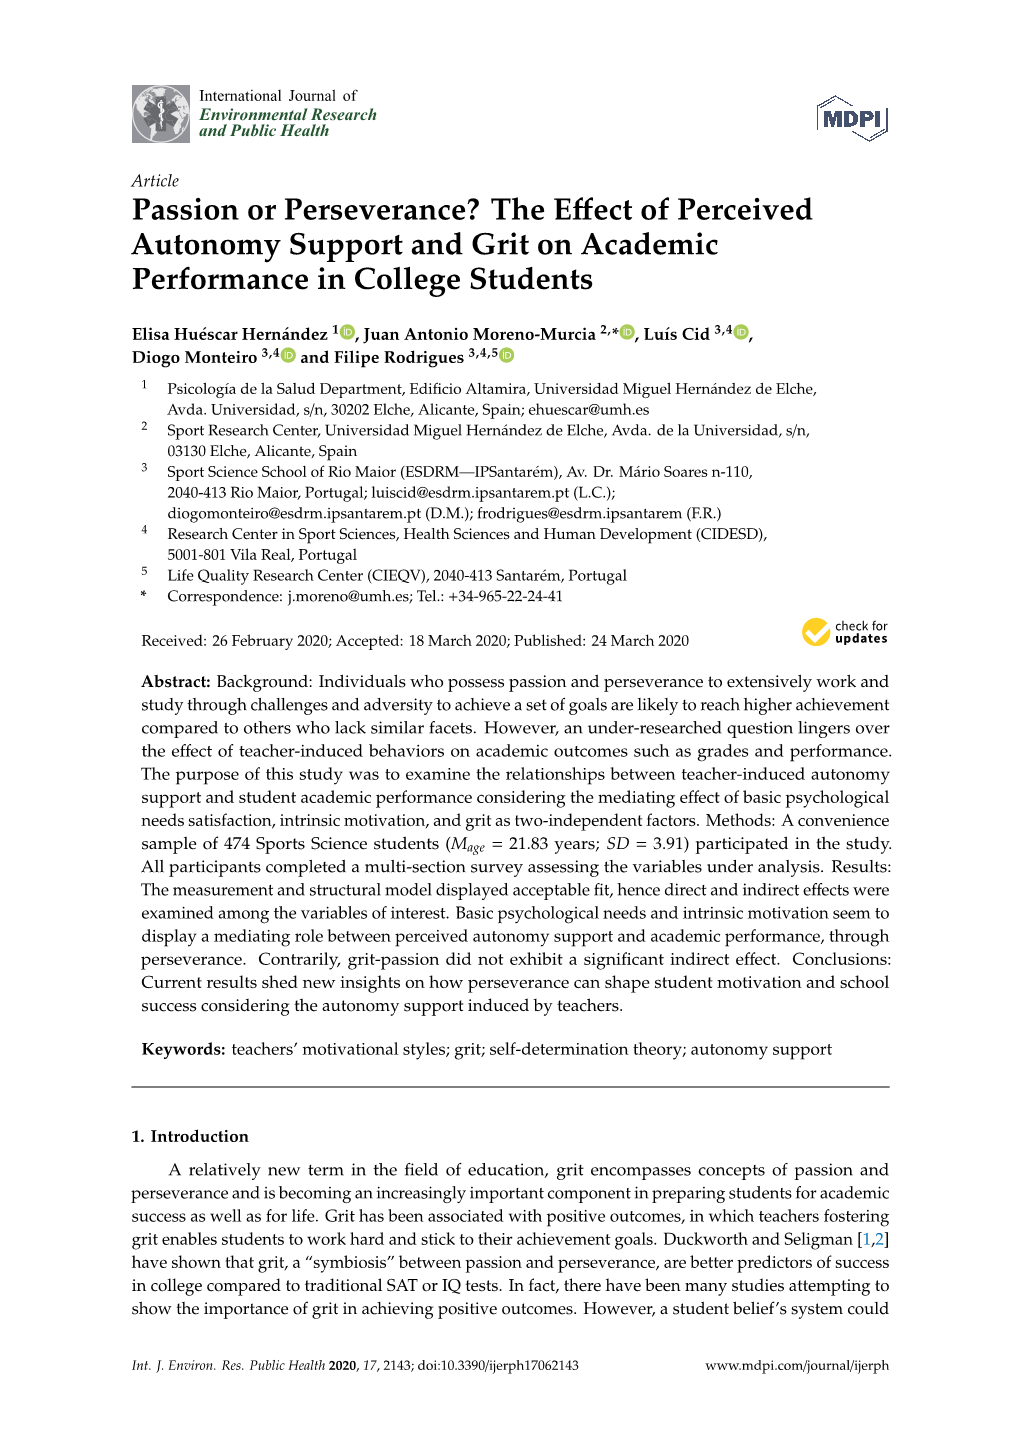 Passion Or Perseverance? the Eﬀect of Perceived Autonomy Support and Grit on Academic Performance in College Students